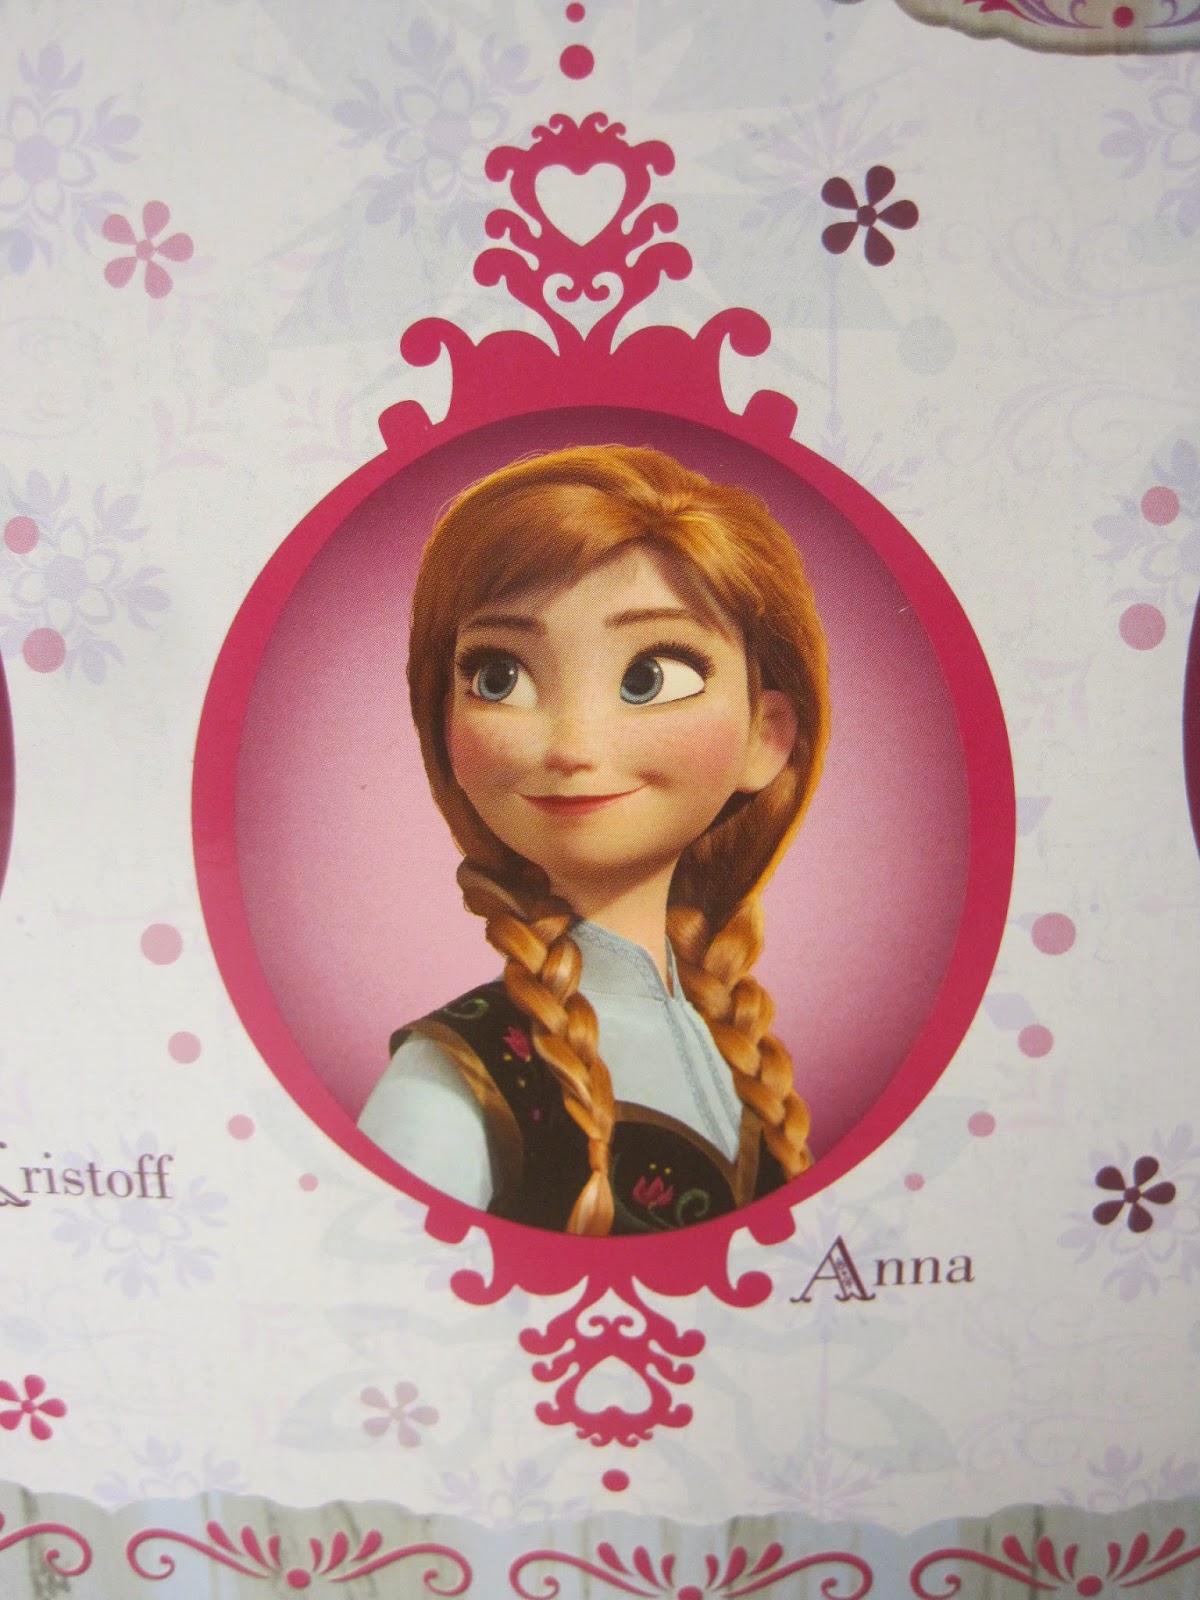 Never Grow Up: A Mom's Guide to Dolls and More: Frozen Mini Doll Set Review